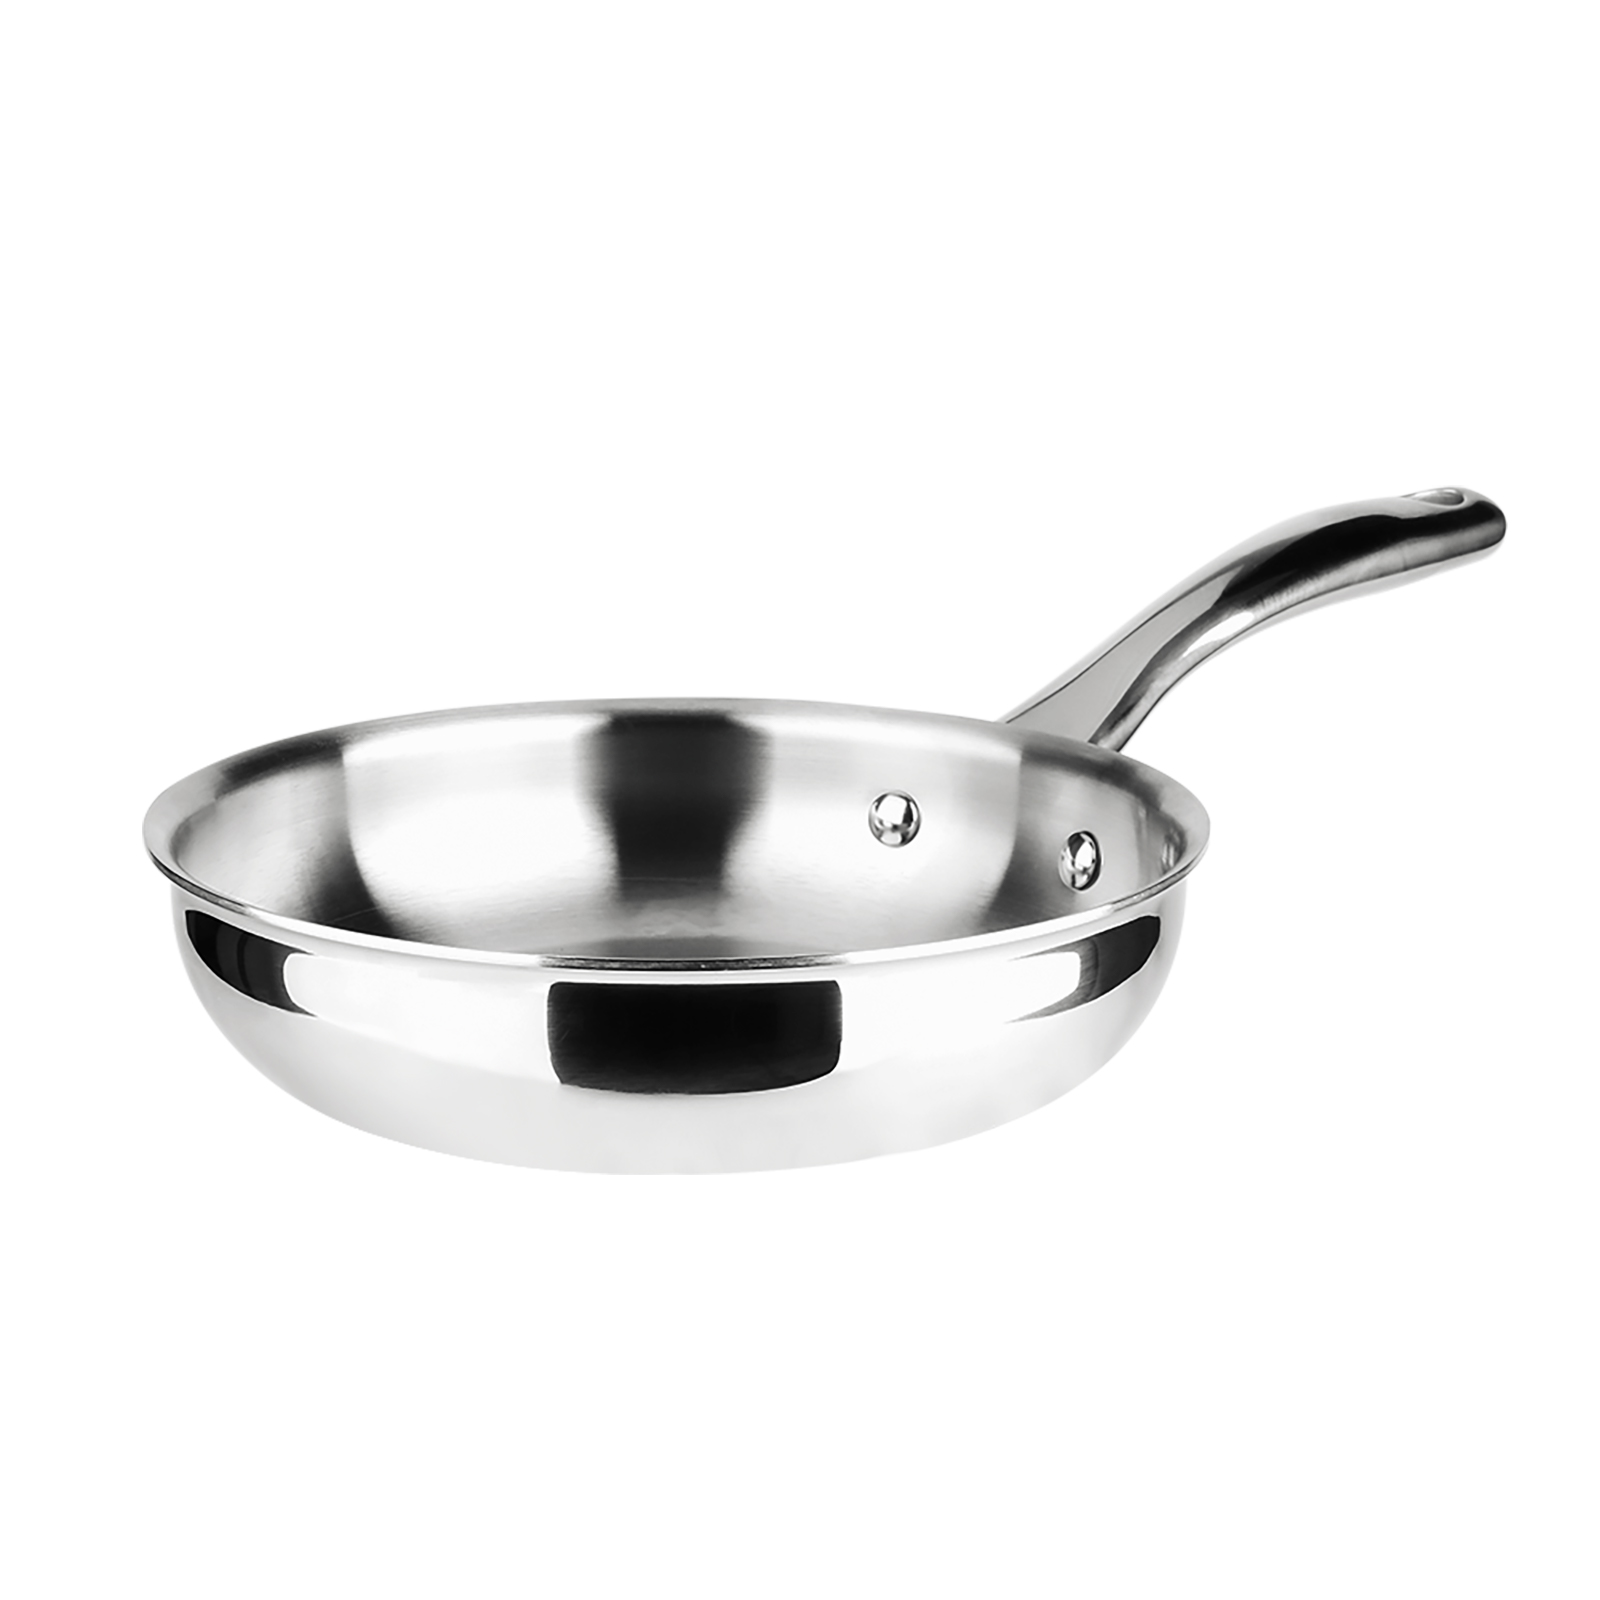 Duxtop 8 inch Stainless Steel Frying Pan, Whole-Clad Tri-Ply Stir